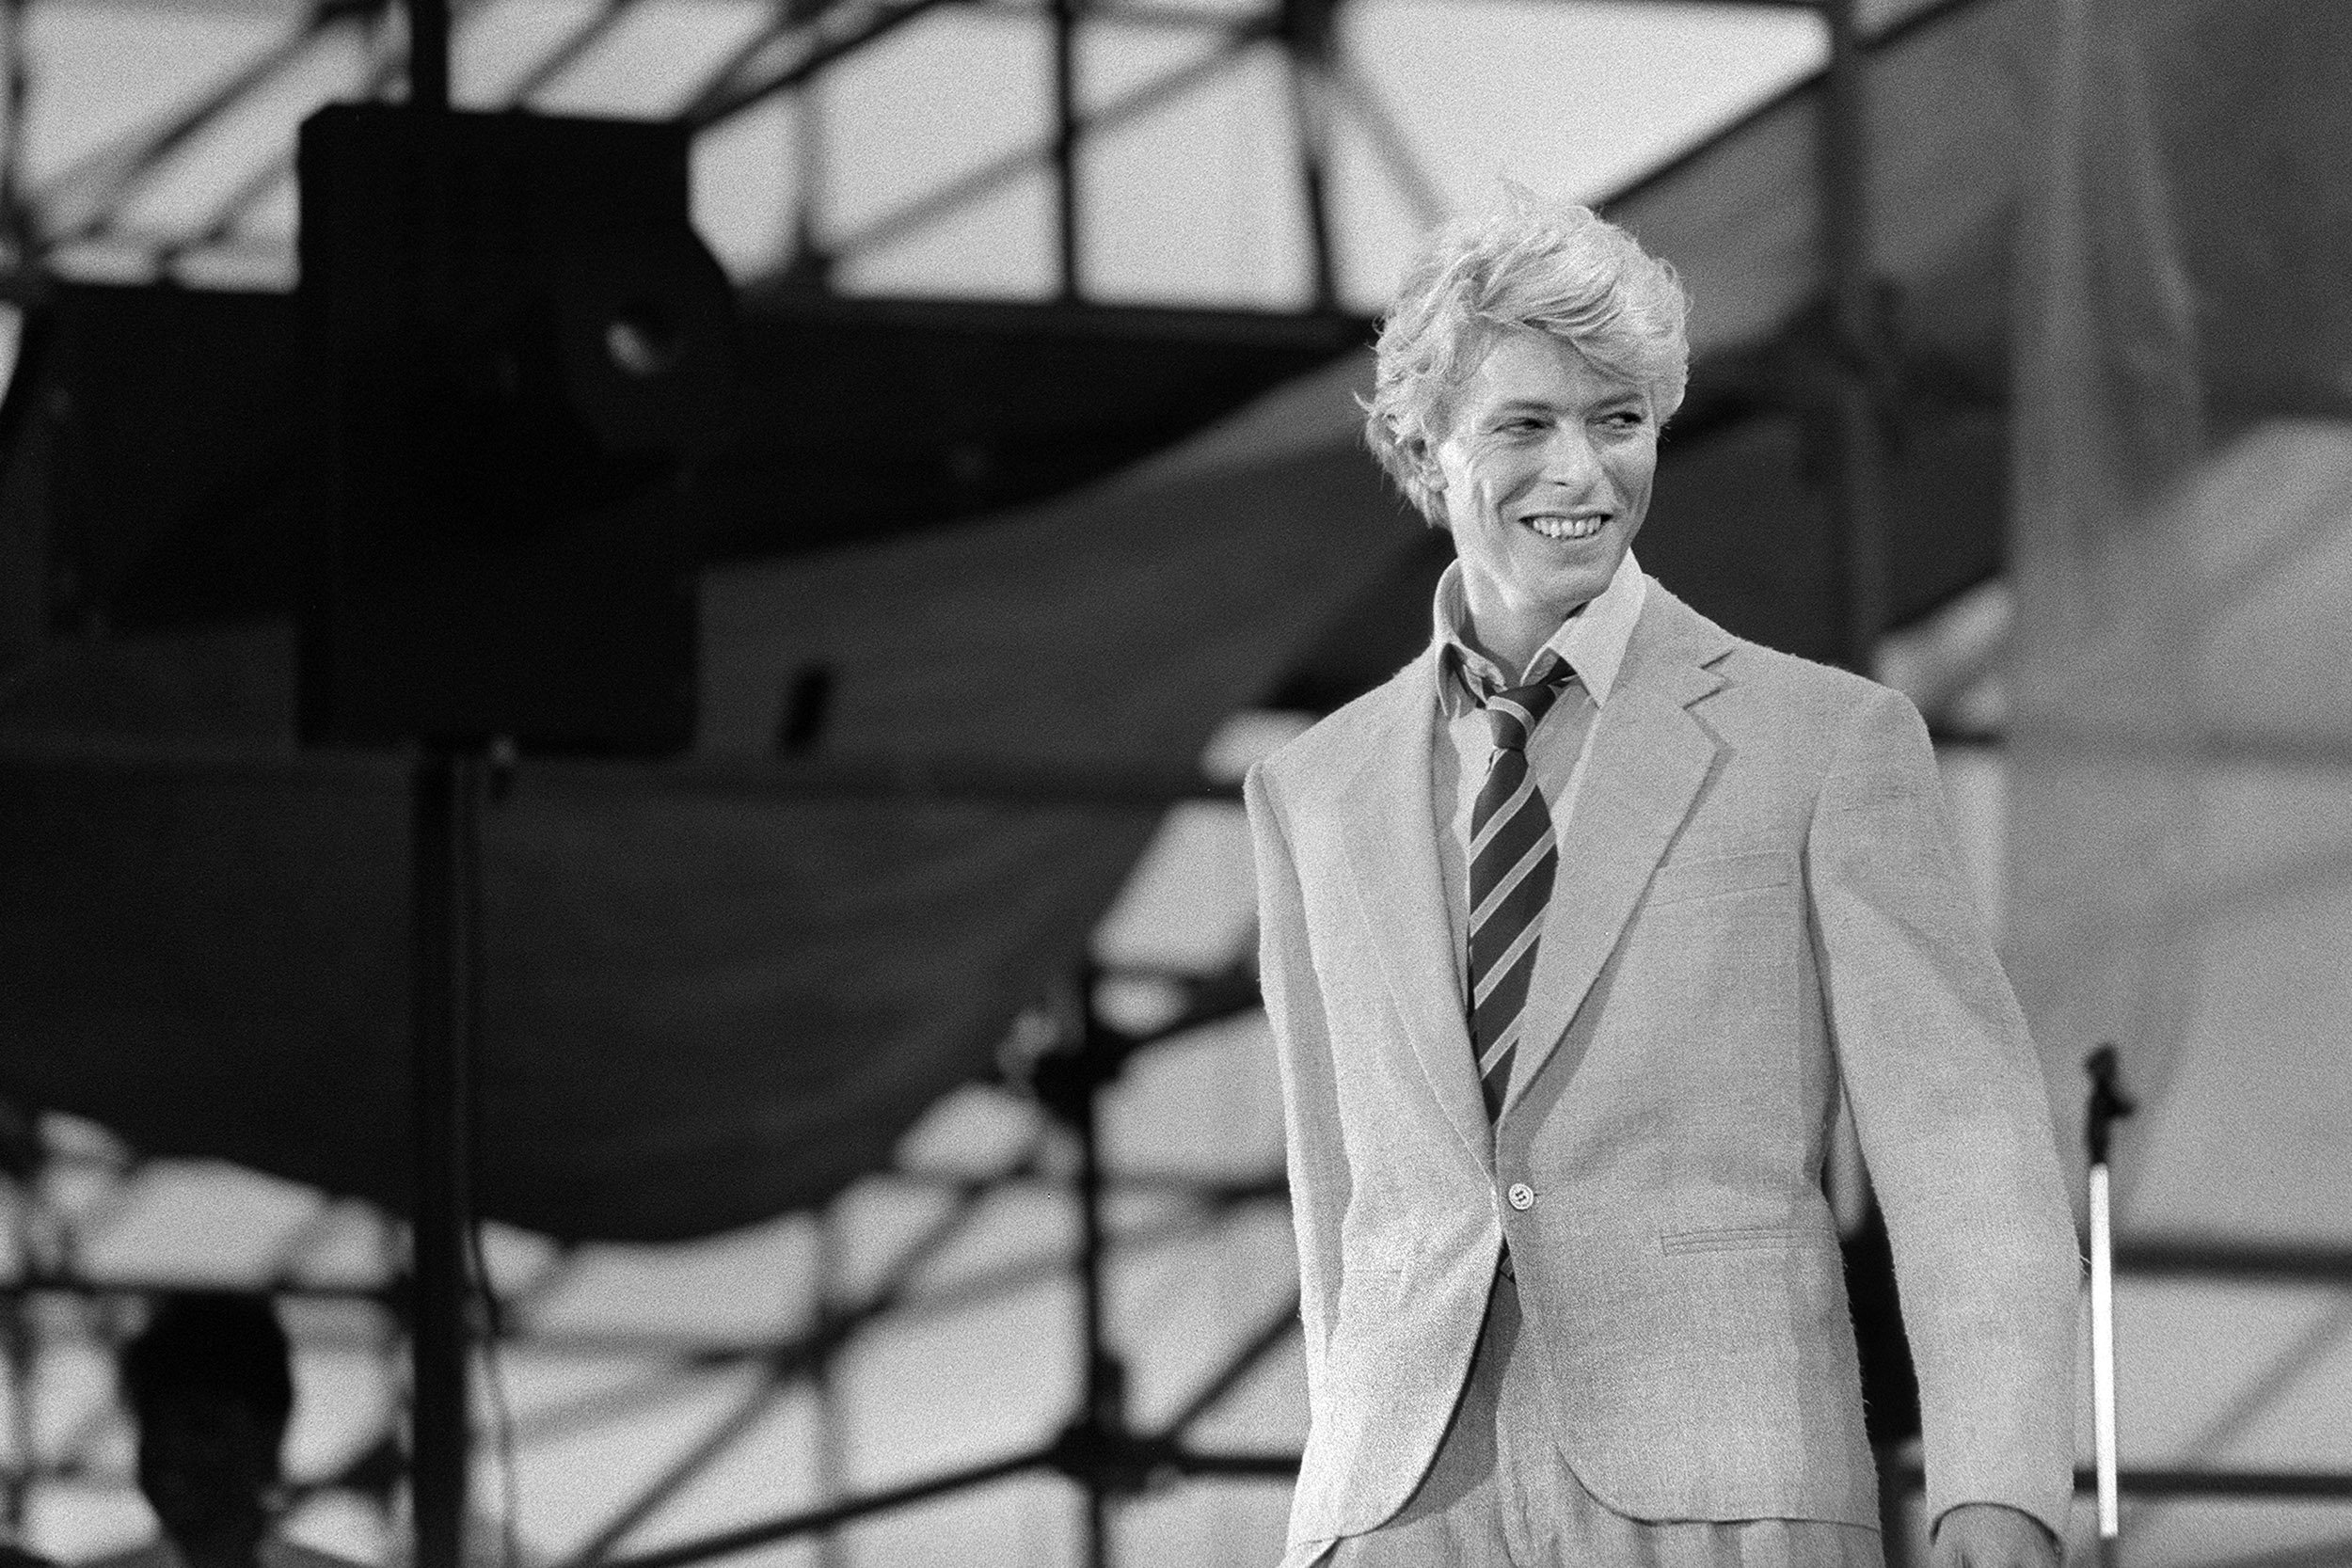 01_11_DavidBowieArchive_01